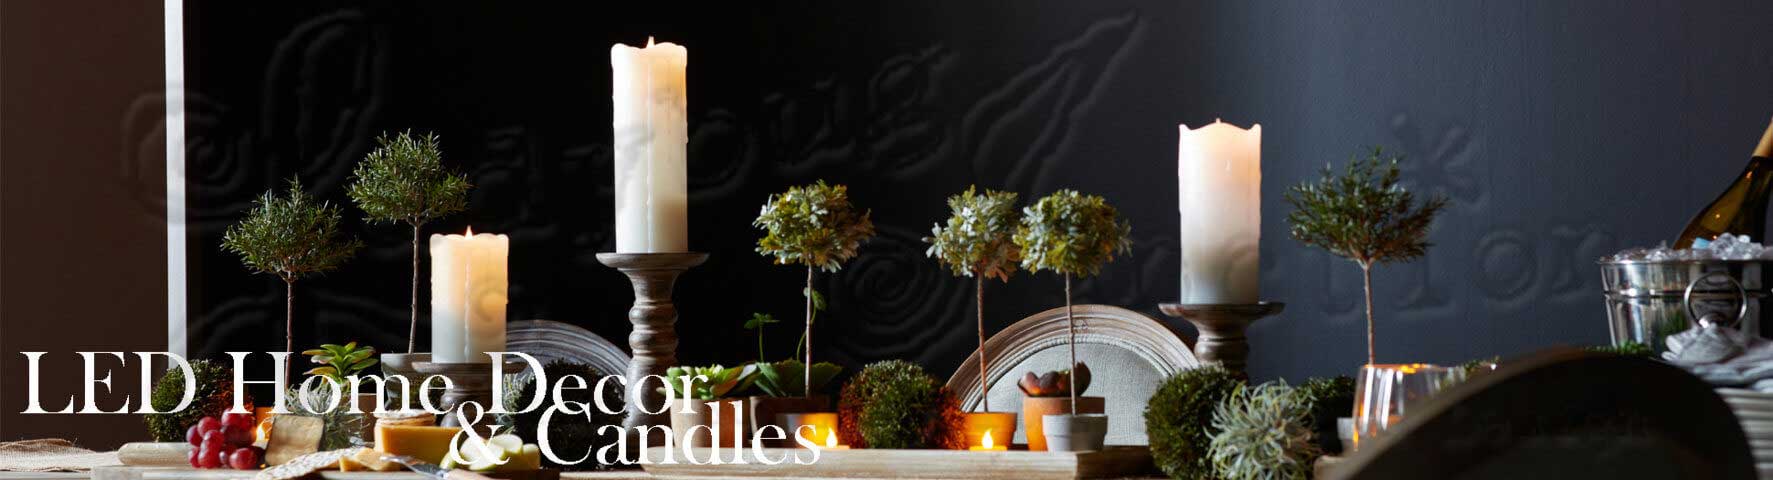 LED Home Decor and Candles